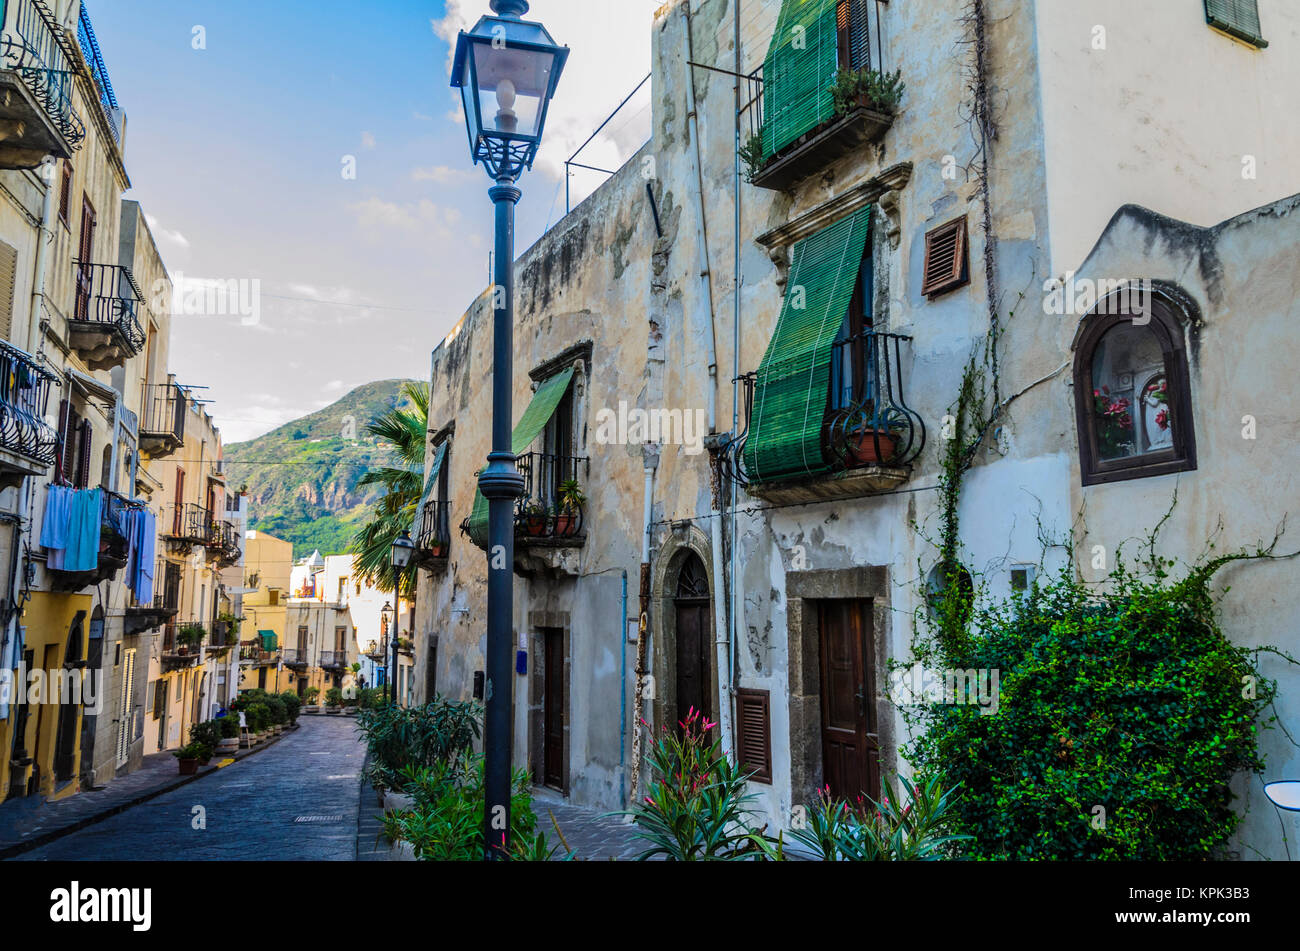 Typical neighborhood street on the island of lipari with its flowering pots and ancient constructions Stock Photo